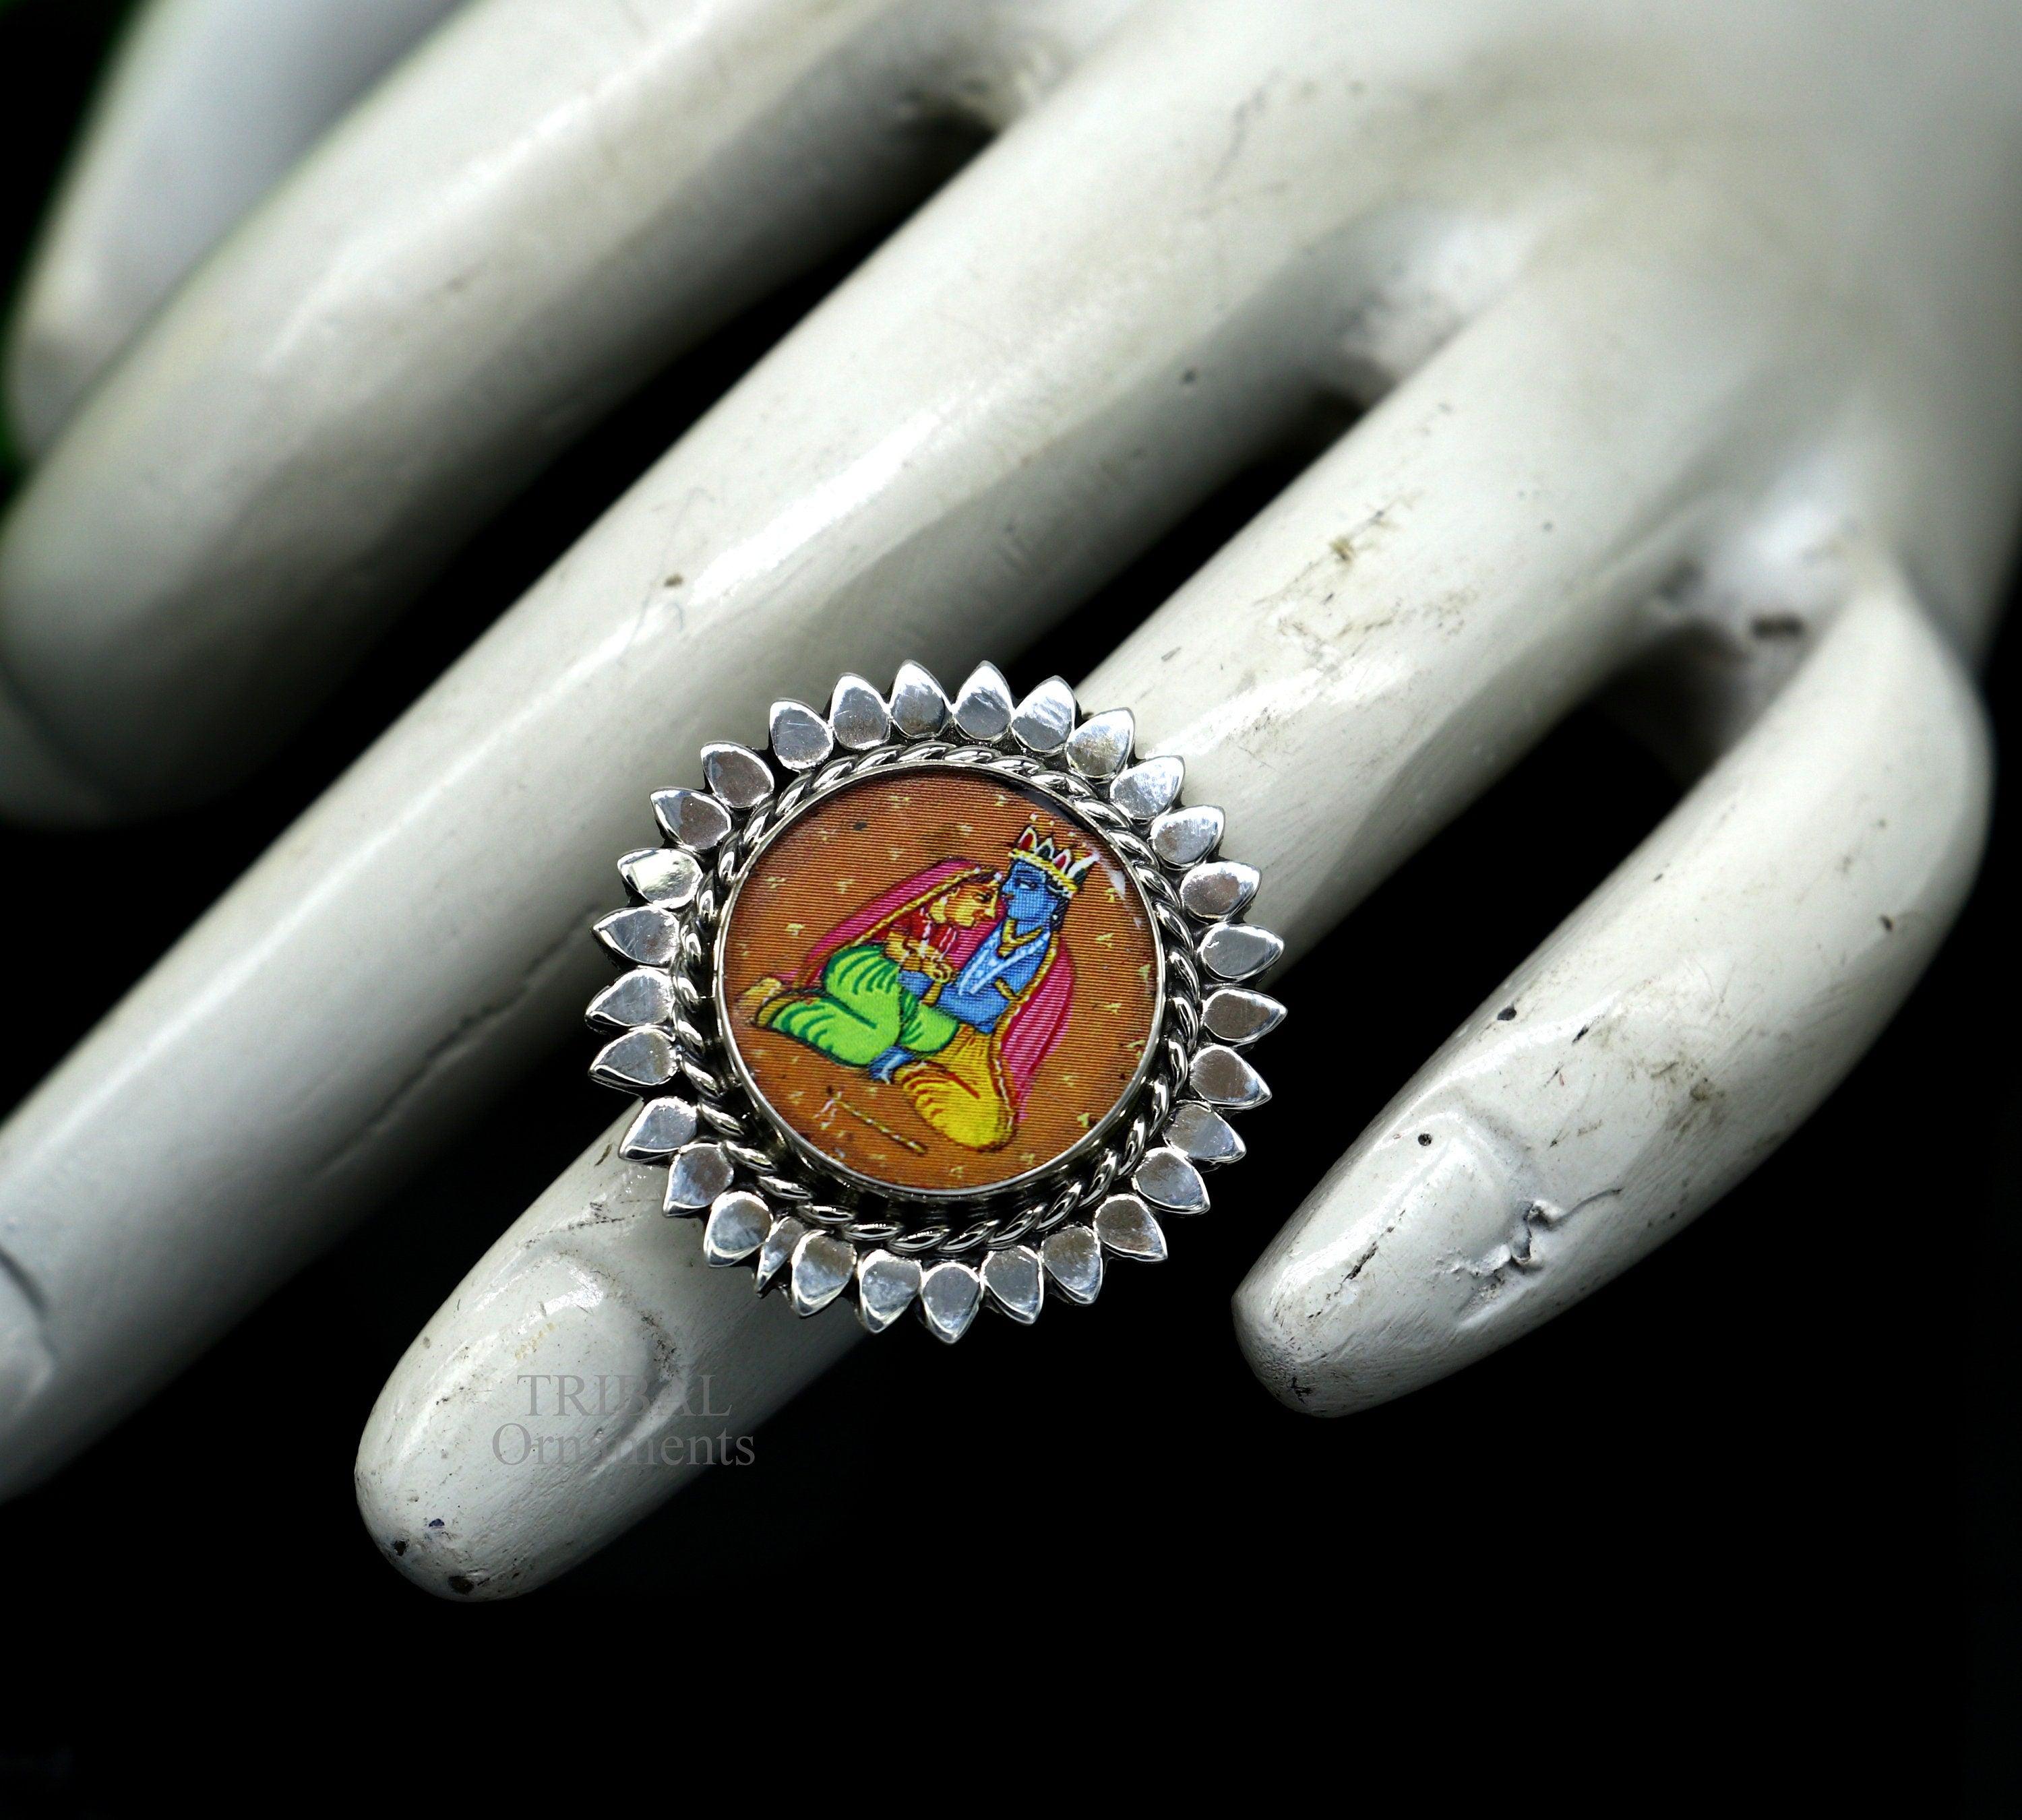 Indian Oxidized Radha Krishna Statement Ring Light Weight Silver Plated  rings | eBay